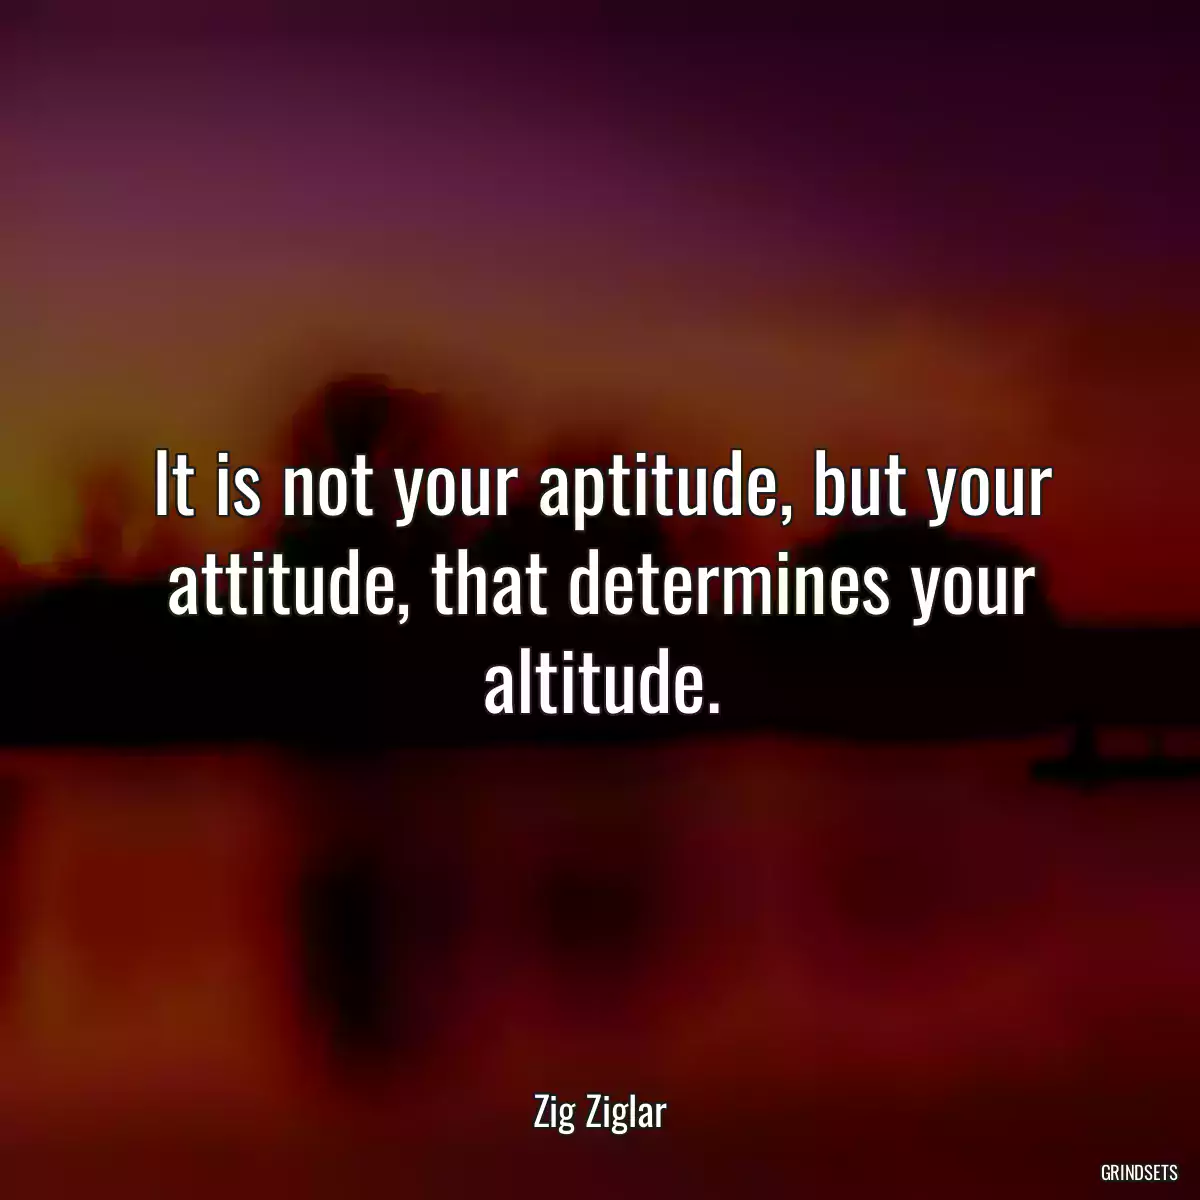 It is not your aptitude, but your attitude, that determines your altitude.